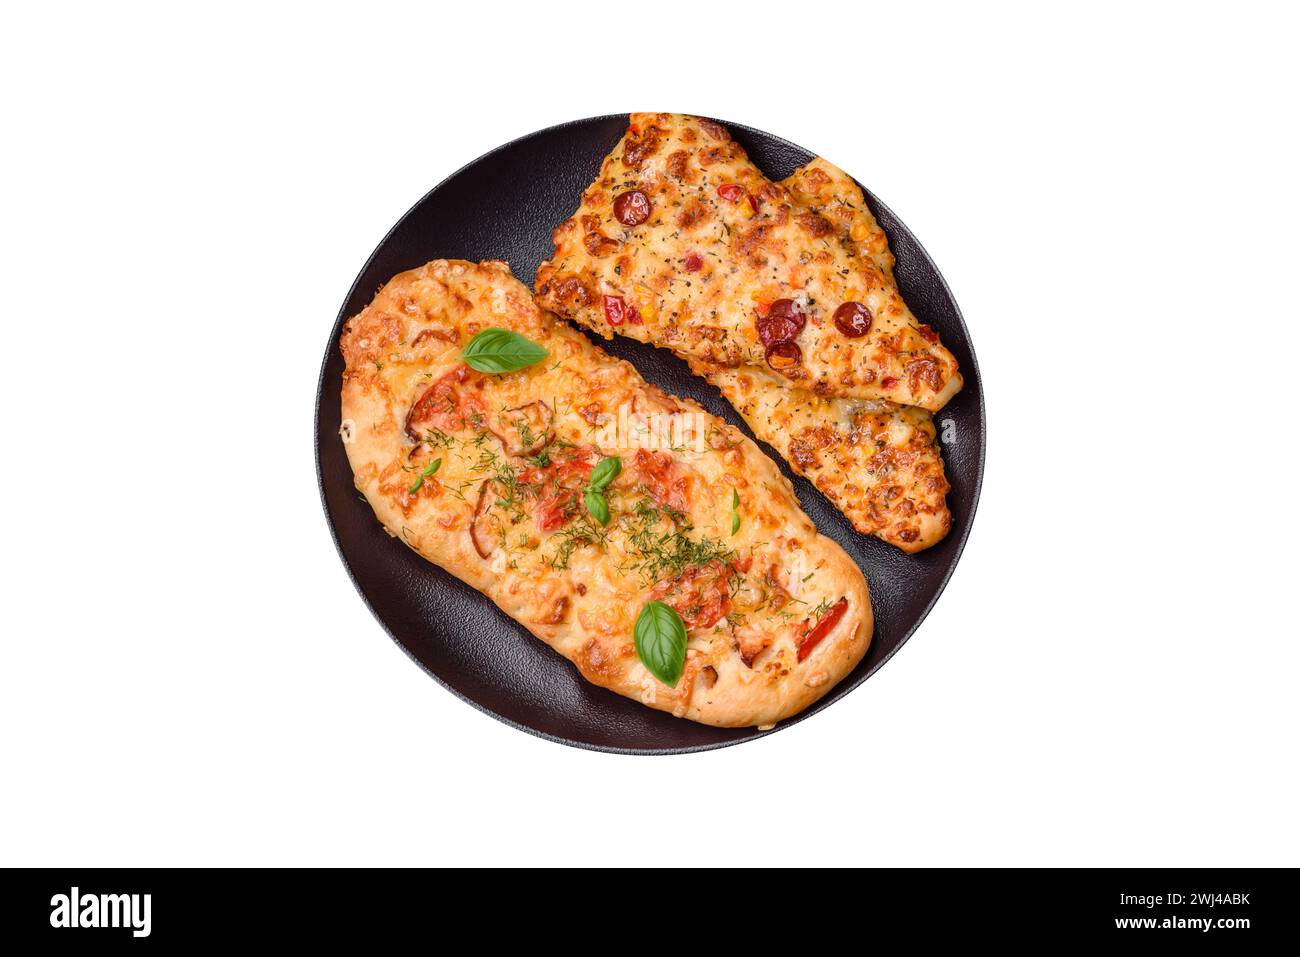 Delicious oven fresh flatbread pizza with cheese, tomatoes, sausage, salt and spices Stock Photo